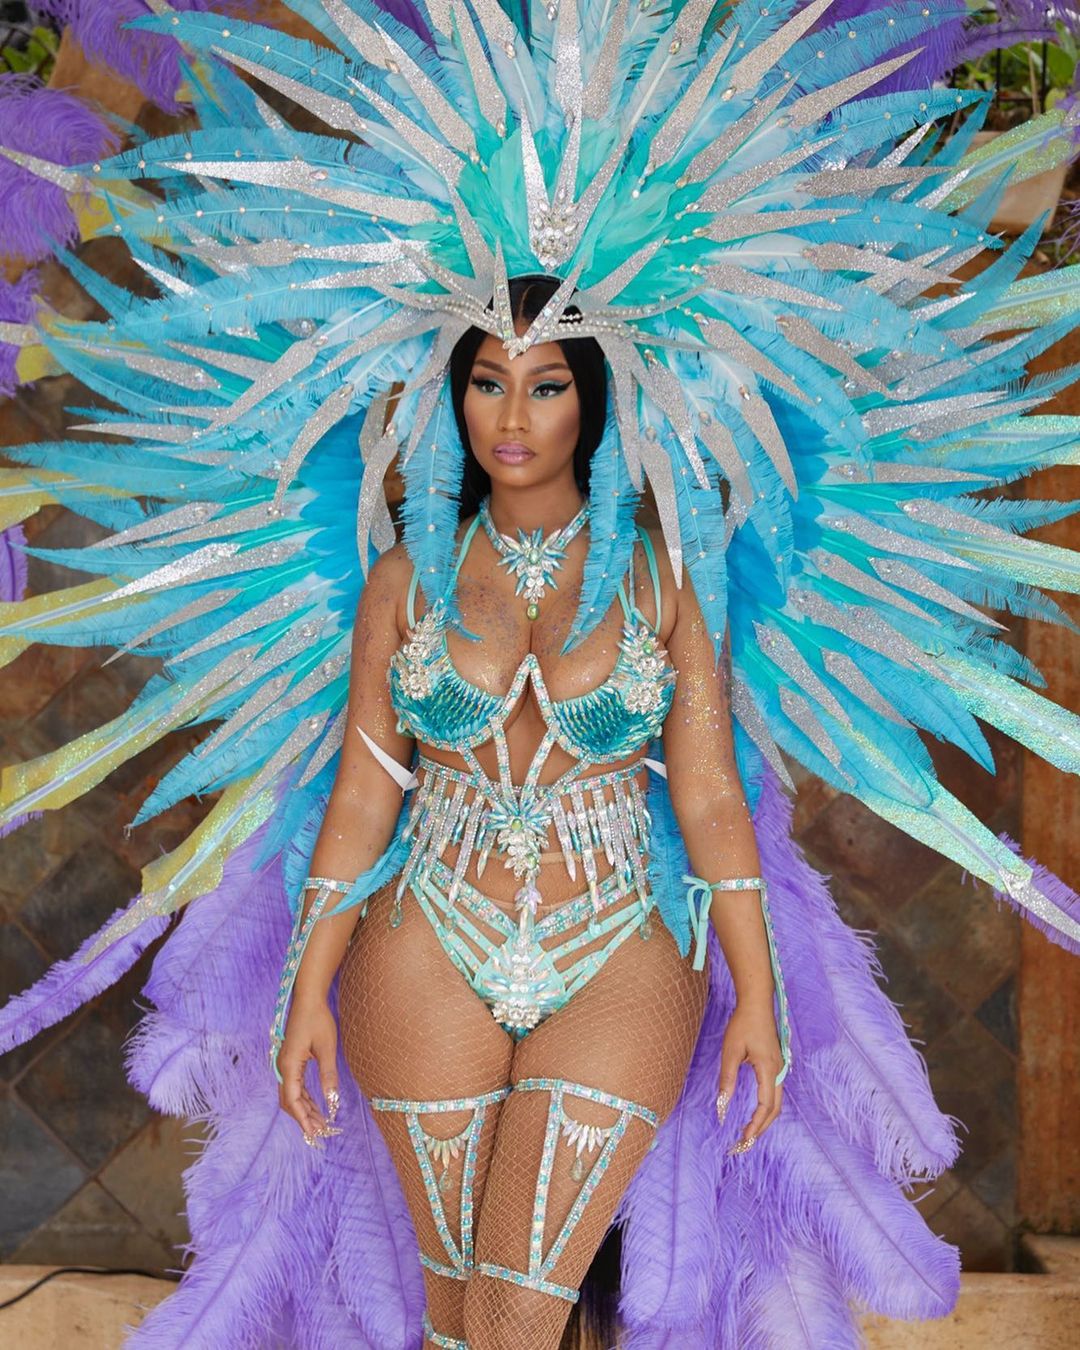 A lovely photo showing Nicki Minaj in a Trinidad costume, made up of a lingerie, with a huge wing attached with it, made from feathers.